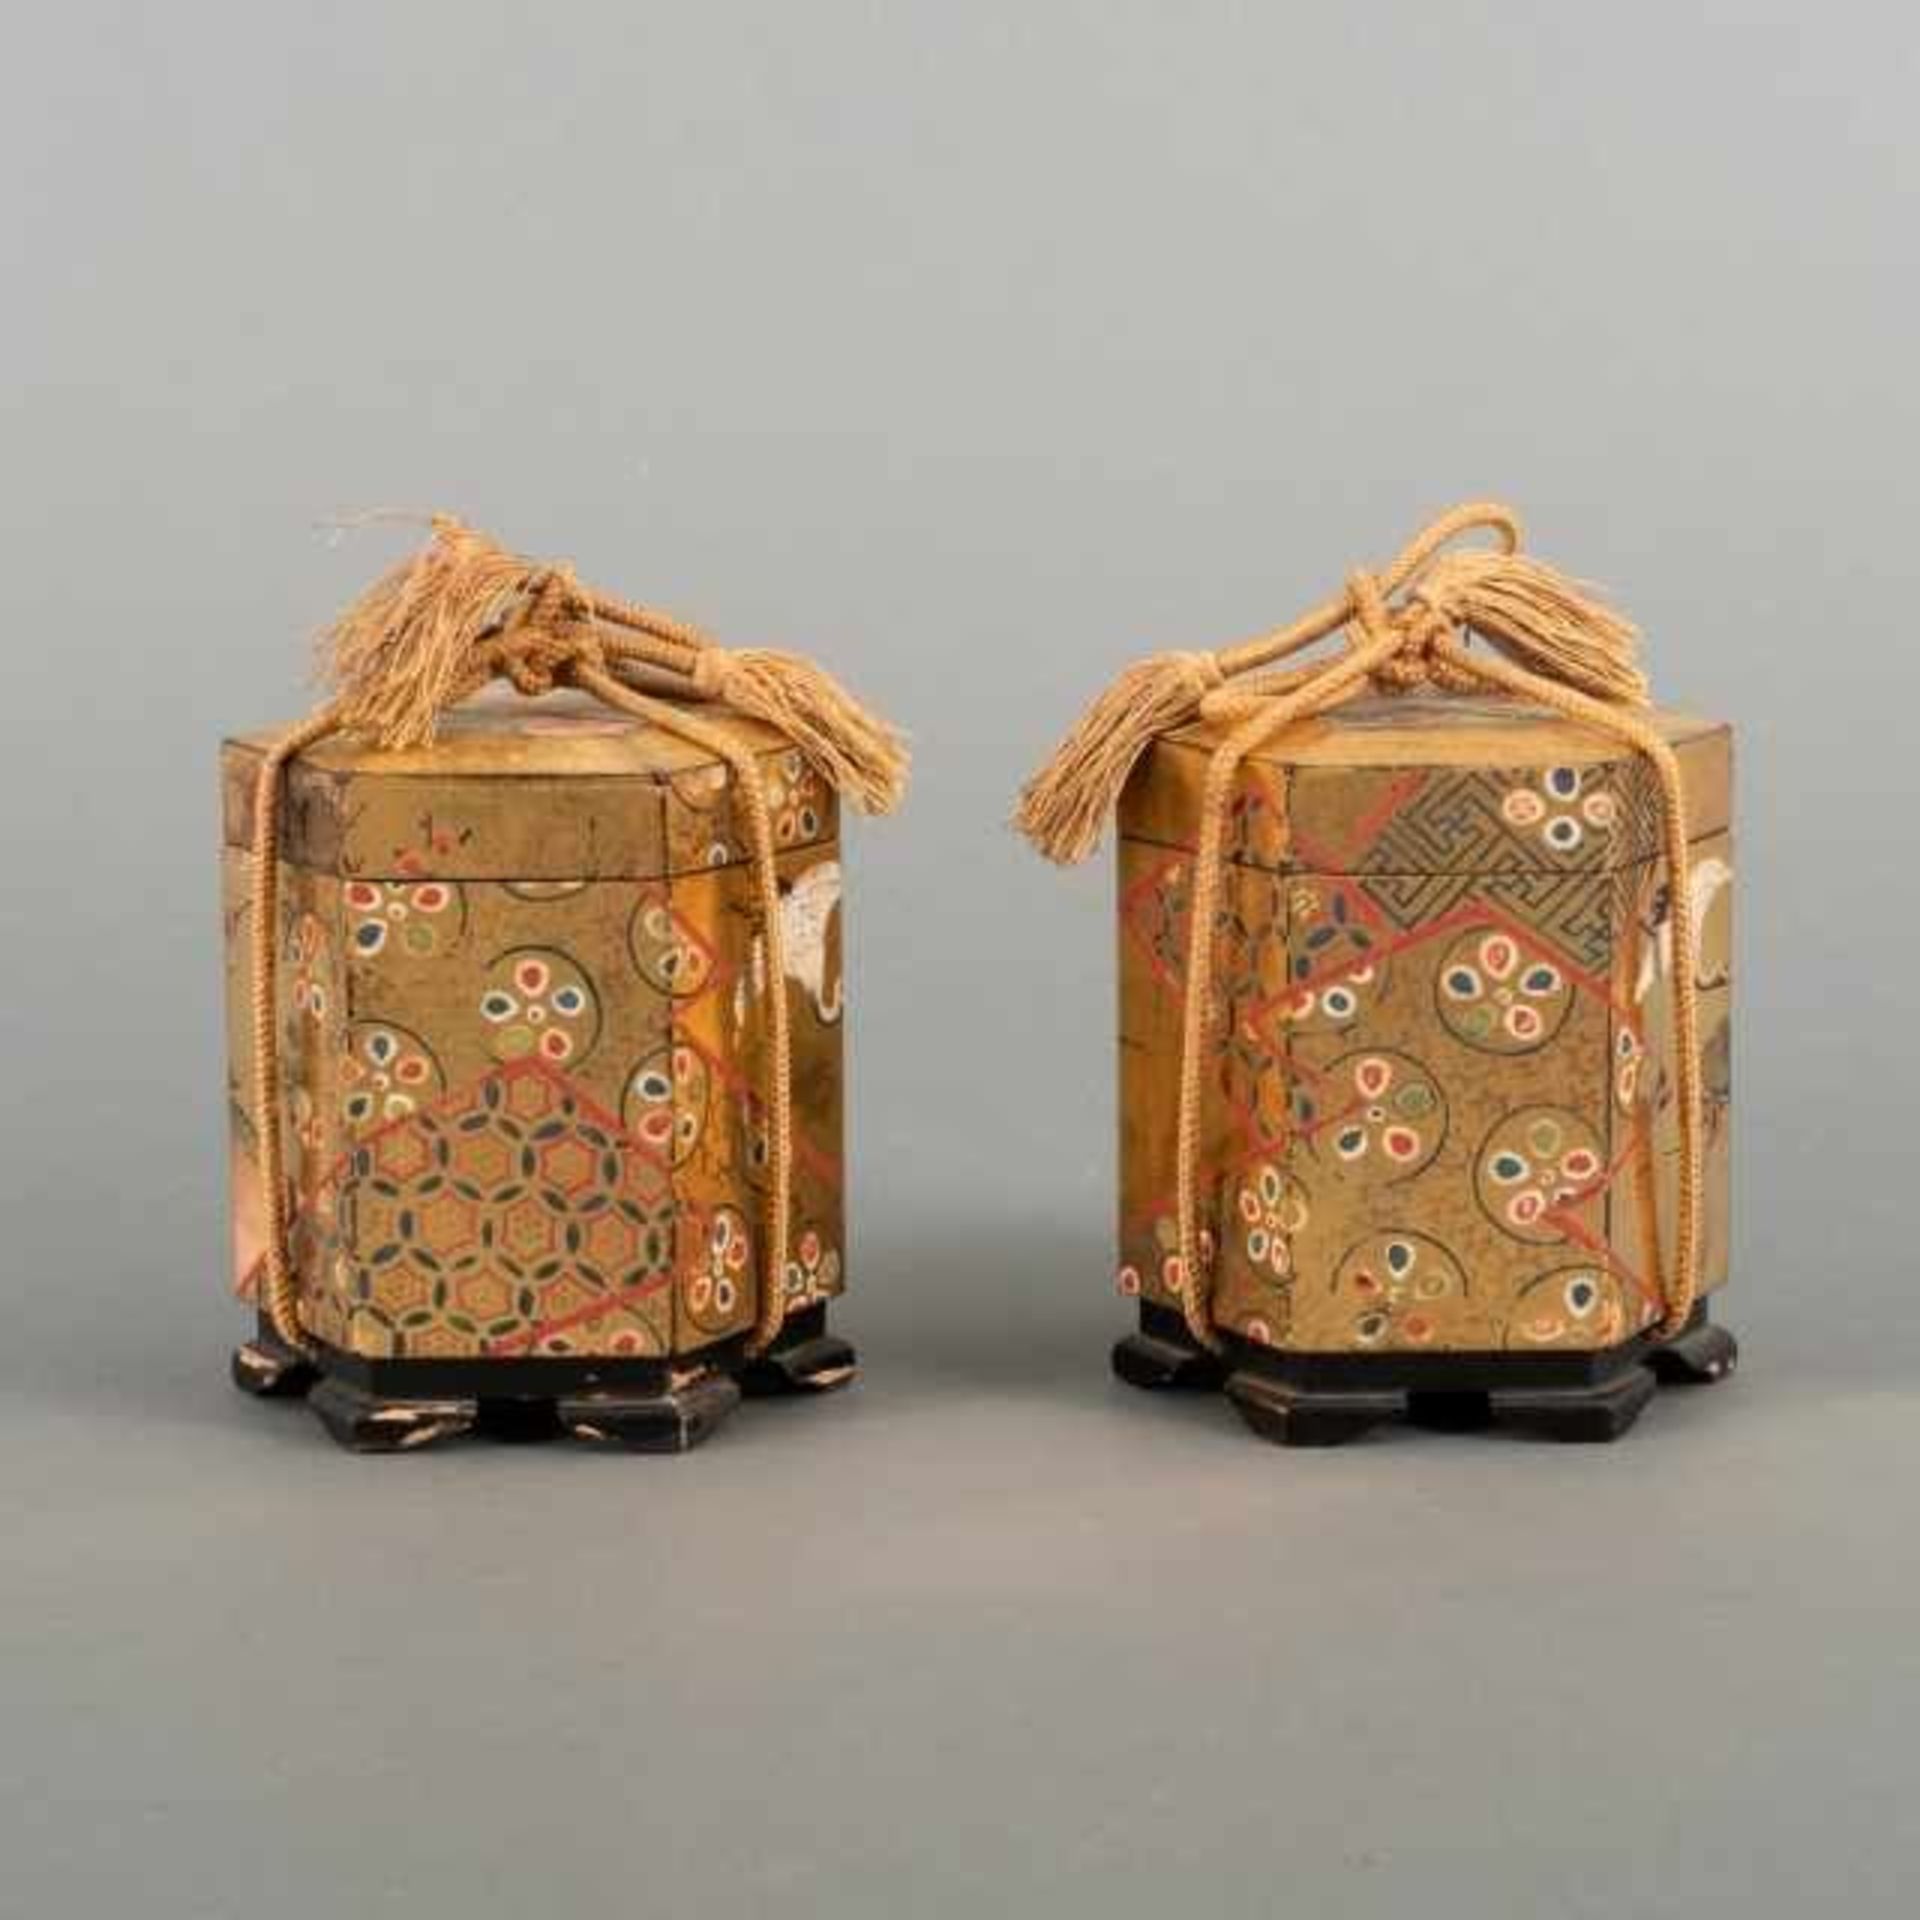 Pair of golden lacquer kaioke, or shell boxes, with polychrome painted motif of cranes and sakura - Bild 3 aus 4